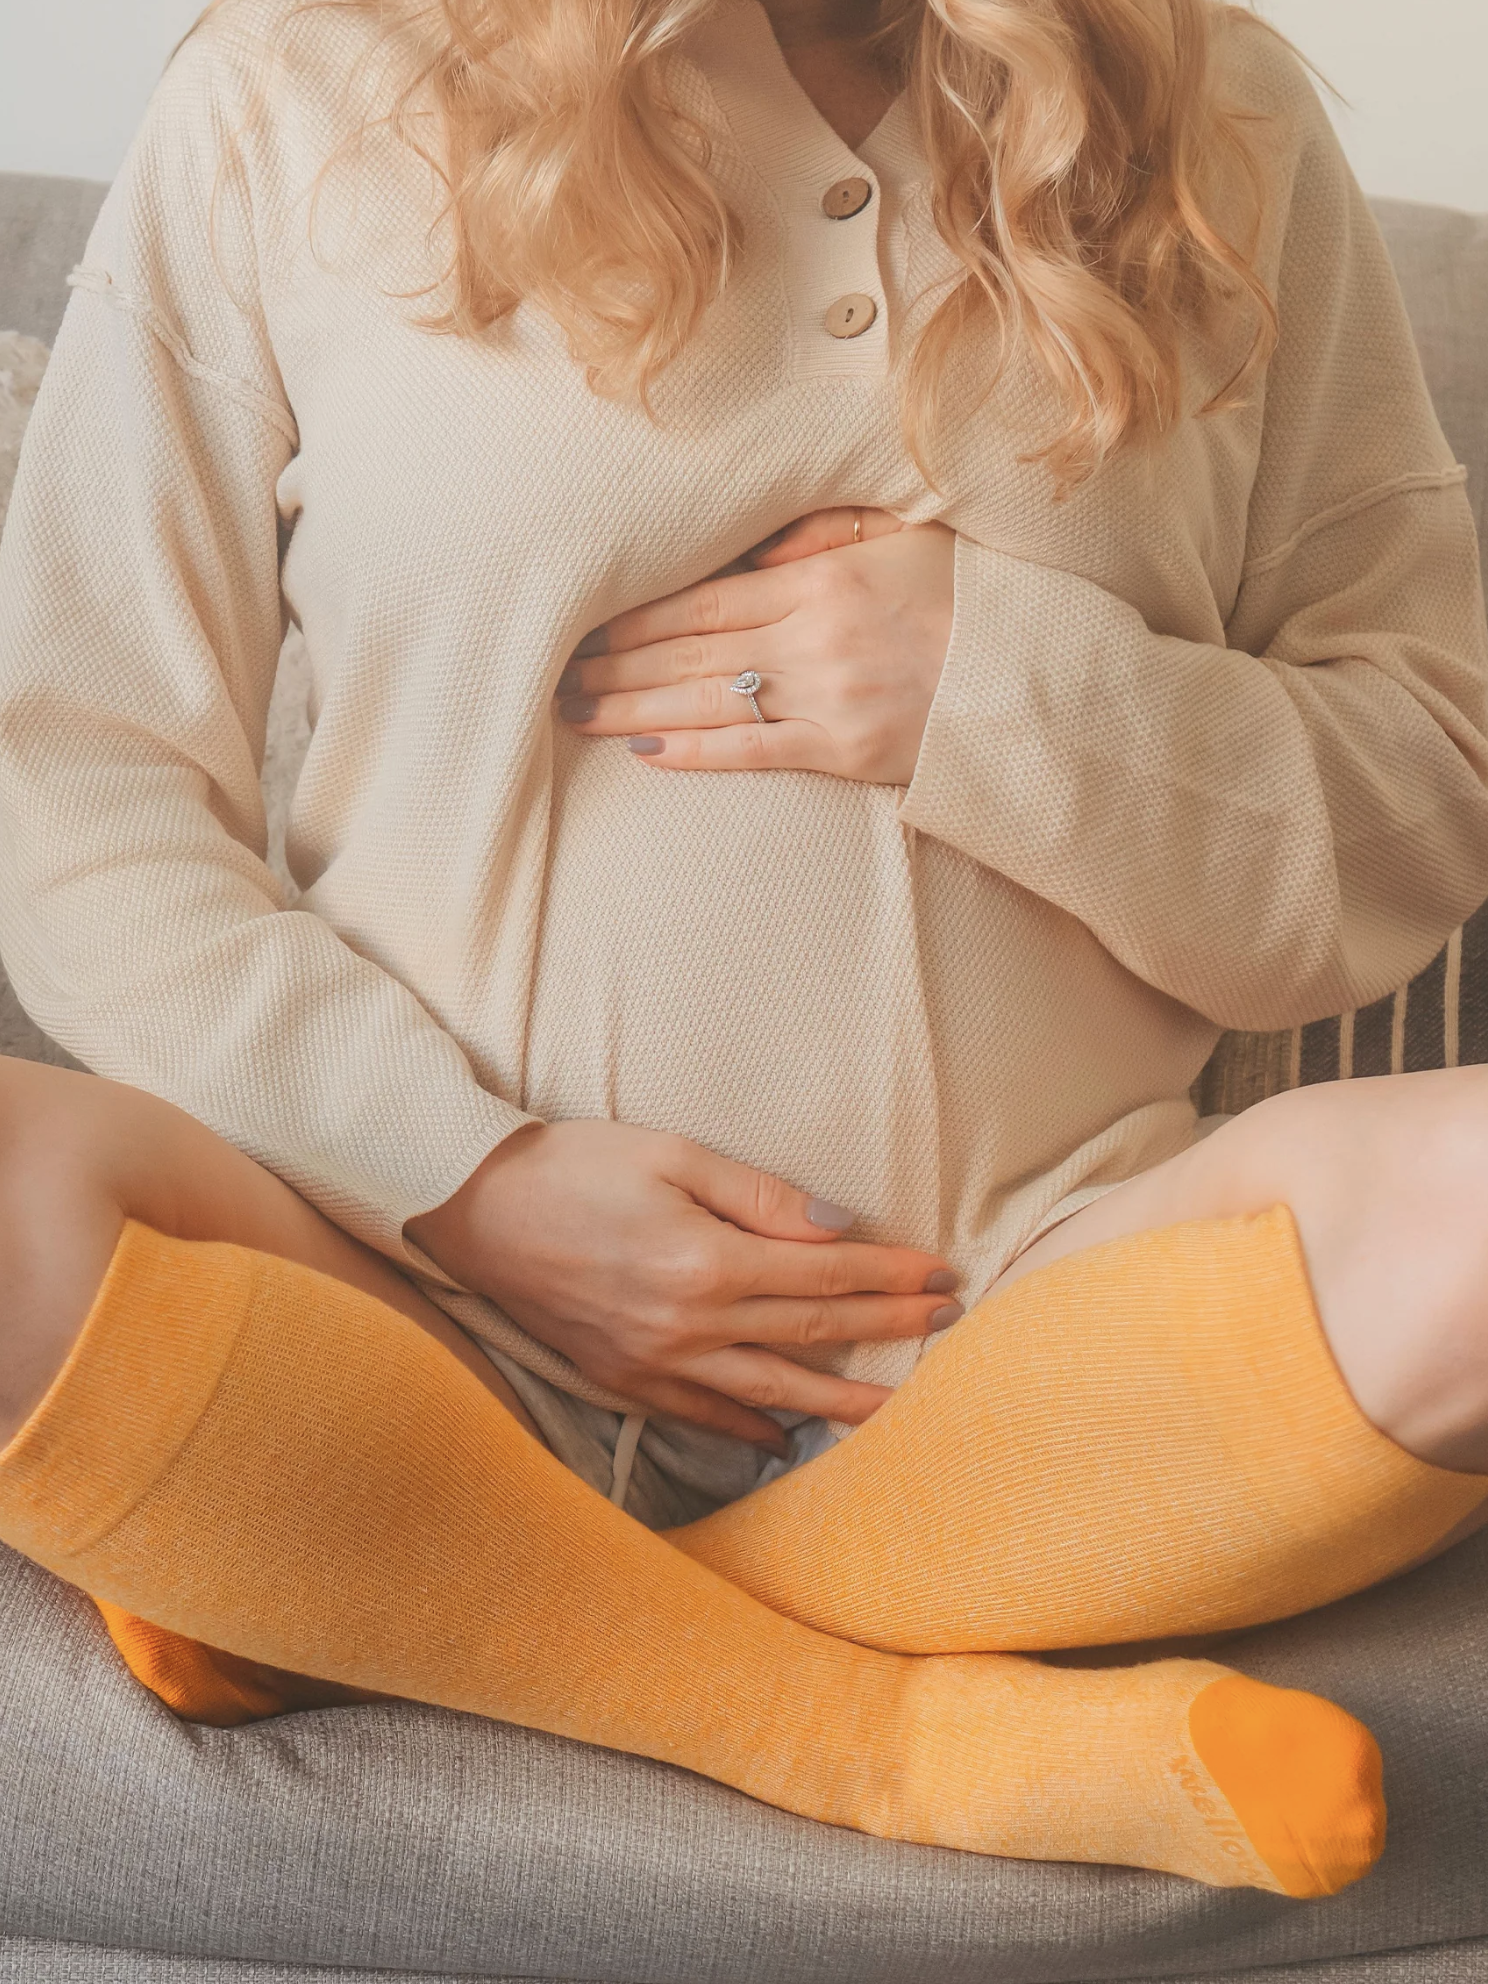 A person sitting on a couch wearing a beige top and orange compression socks, holding their pregnant belly.